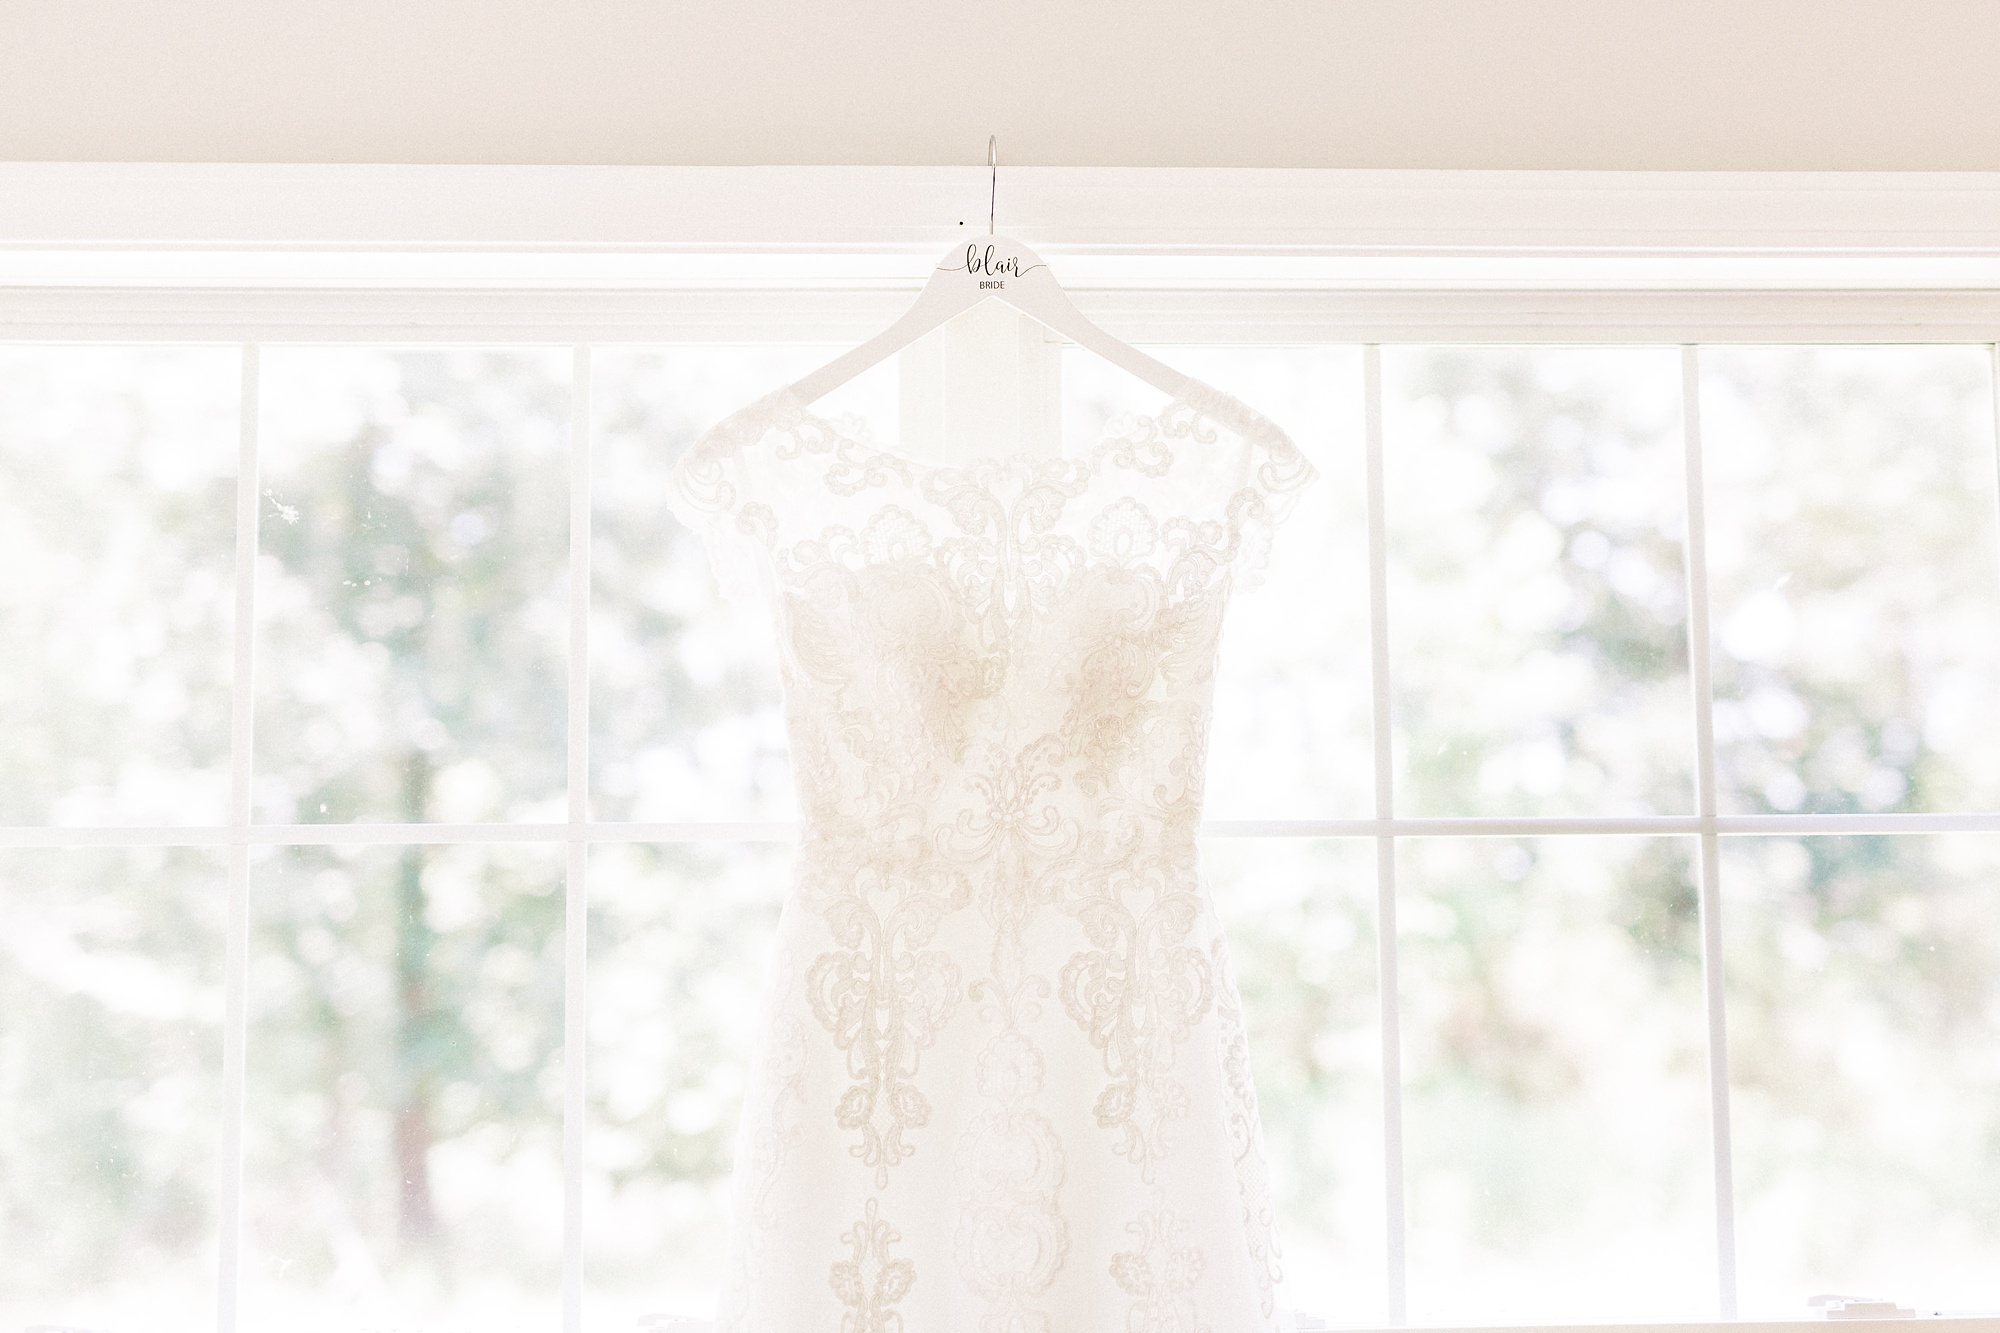 Elegant wedding in Charlotte NC photographed by Kevyn Dixon Photography with light blue and navy details